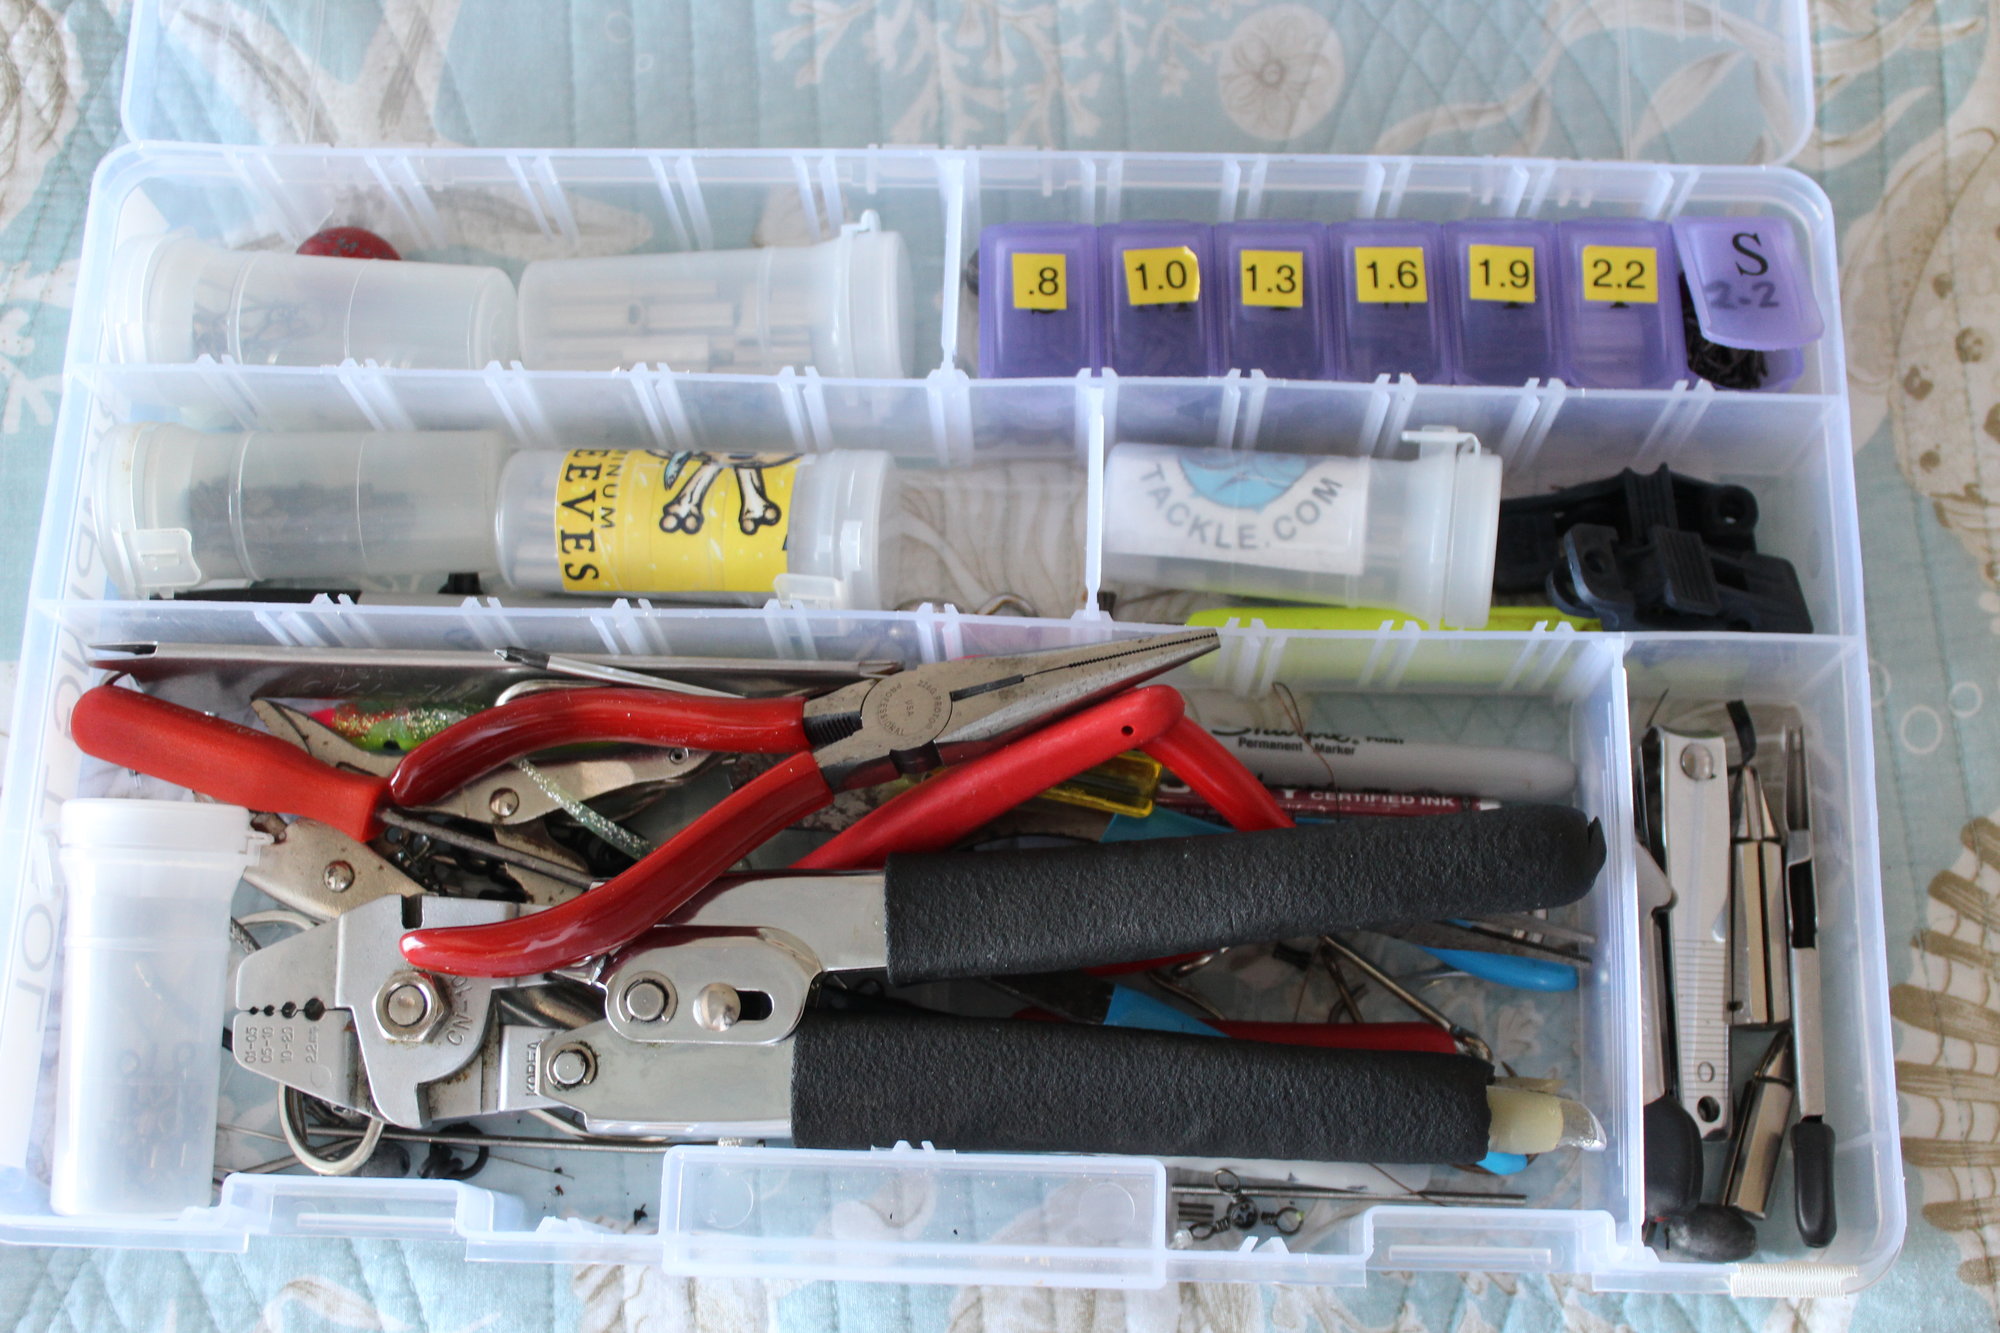 Tackle storage tips and tricks - The Hull Truth - Boating and Fishing Forum